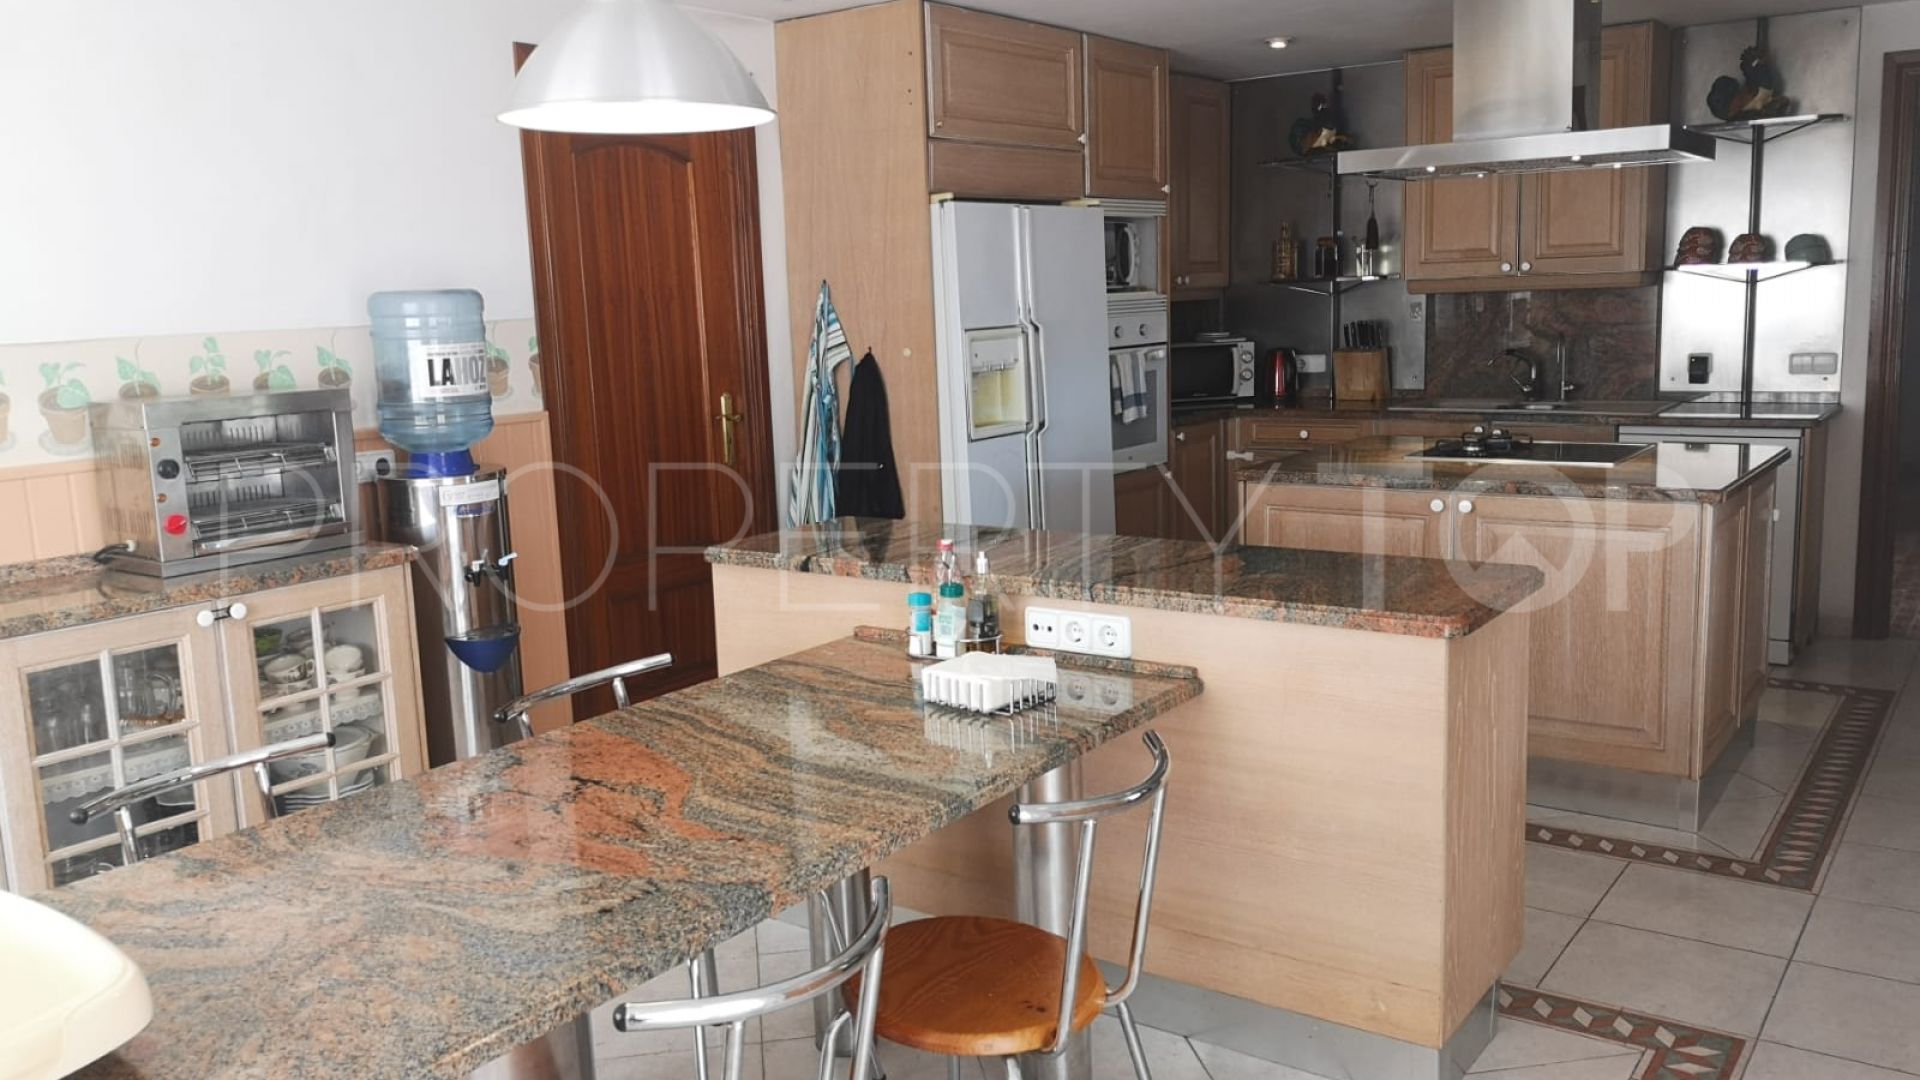 For sale house in Palmanova with 5 bedrooms